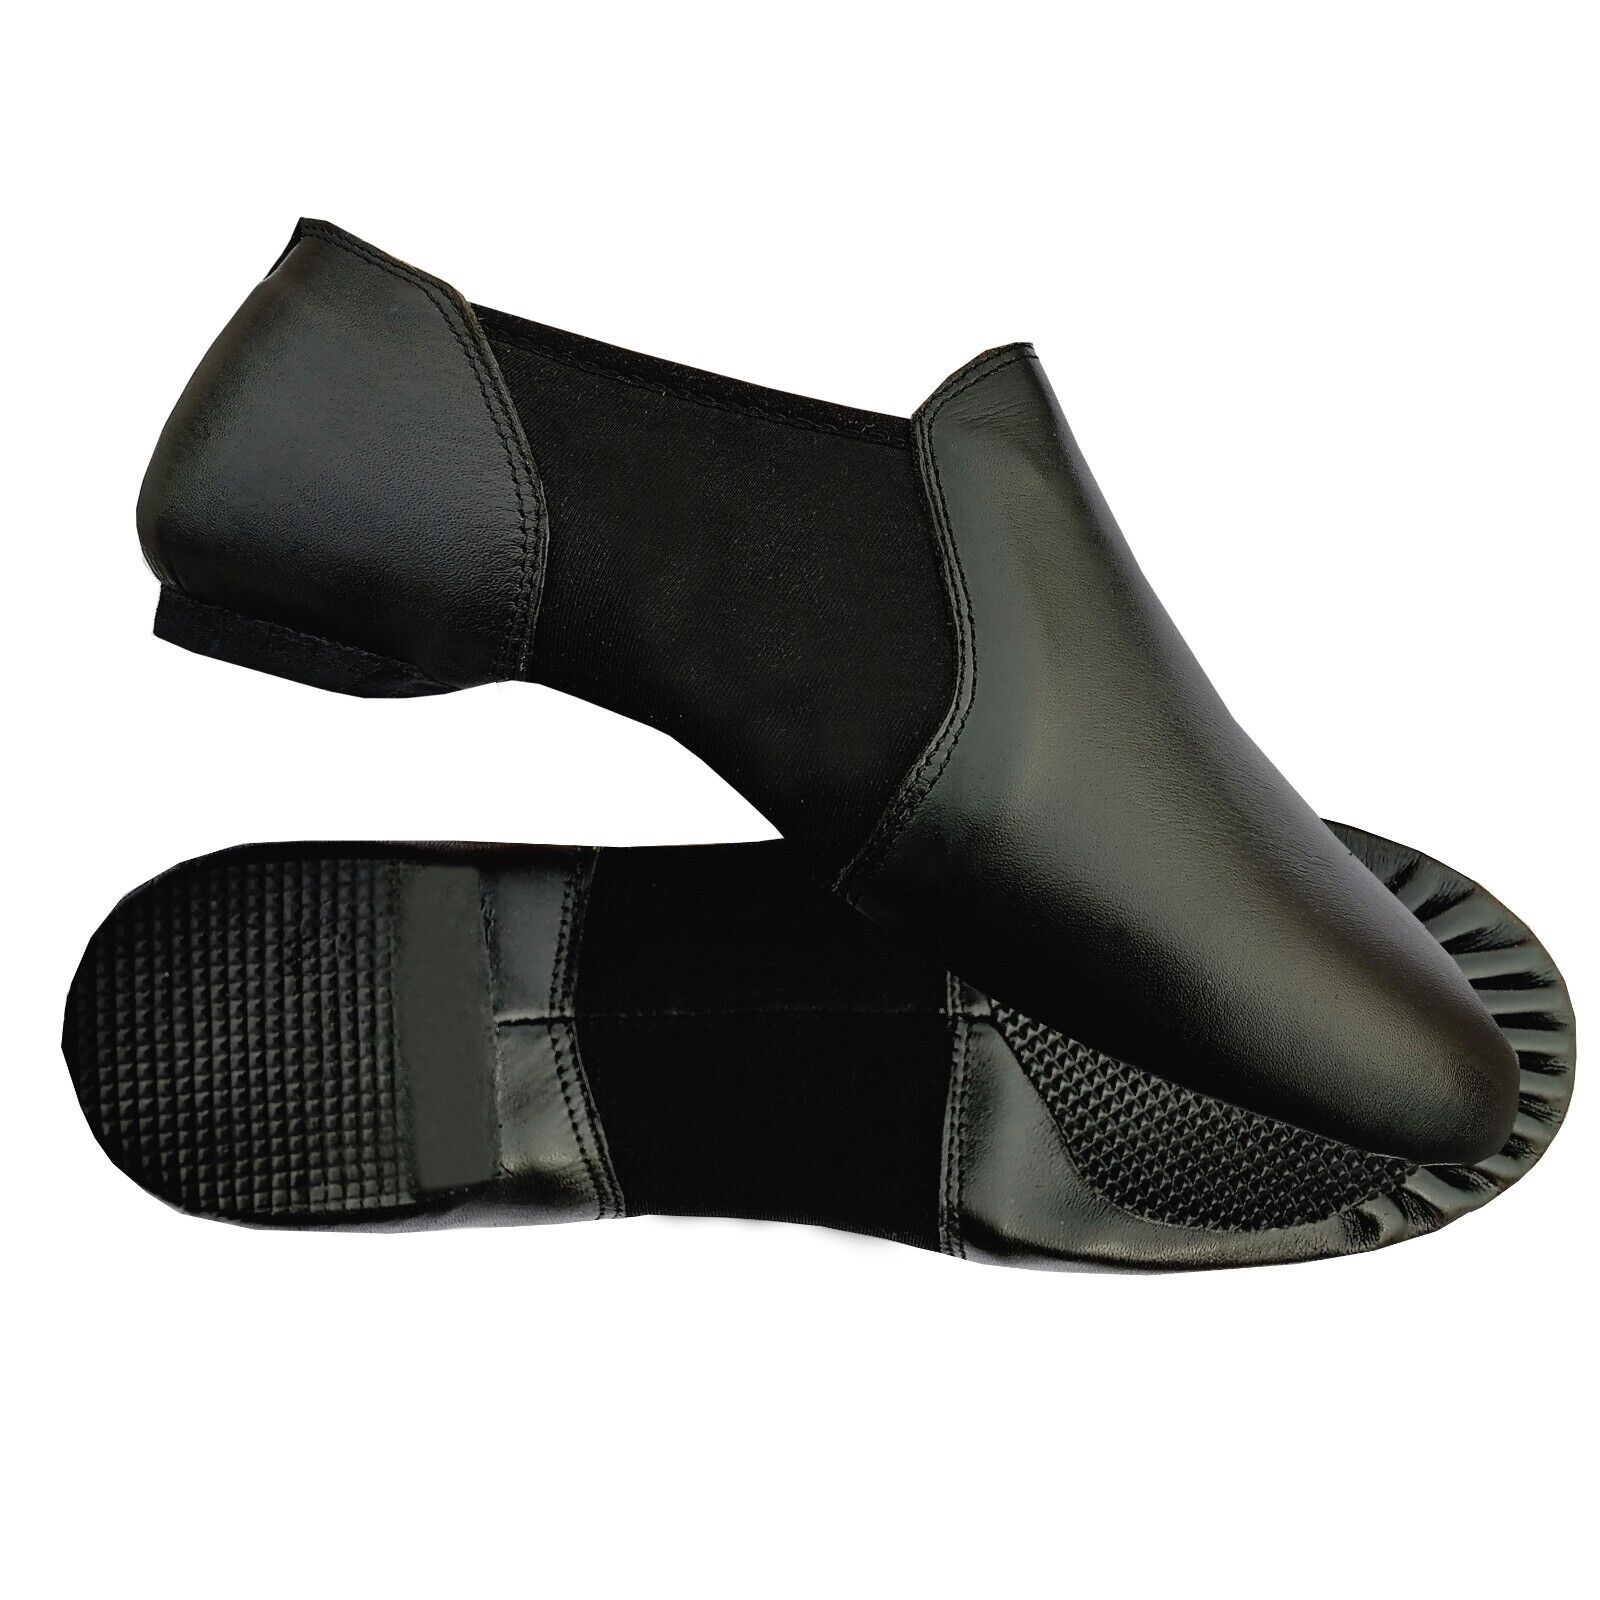 Unisex Black Leather Slip-On and Off Shoes - Comfortable Split